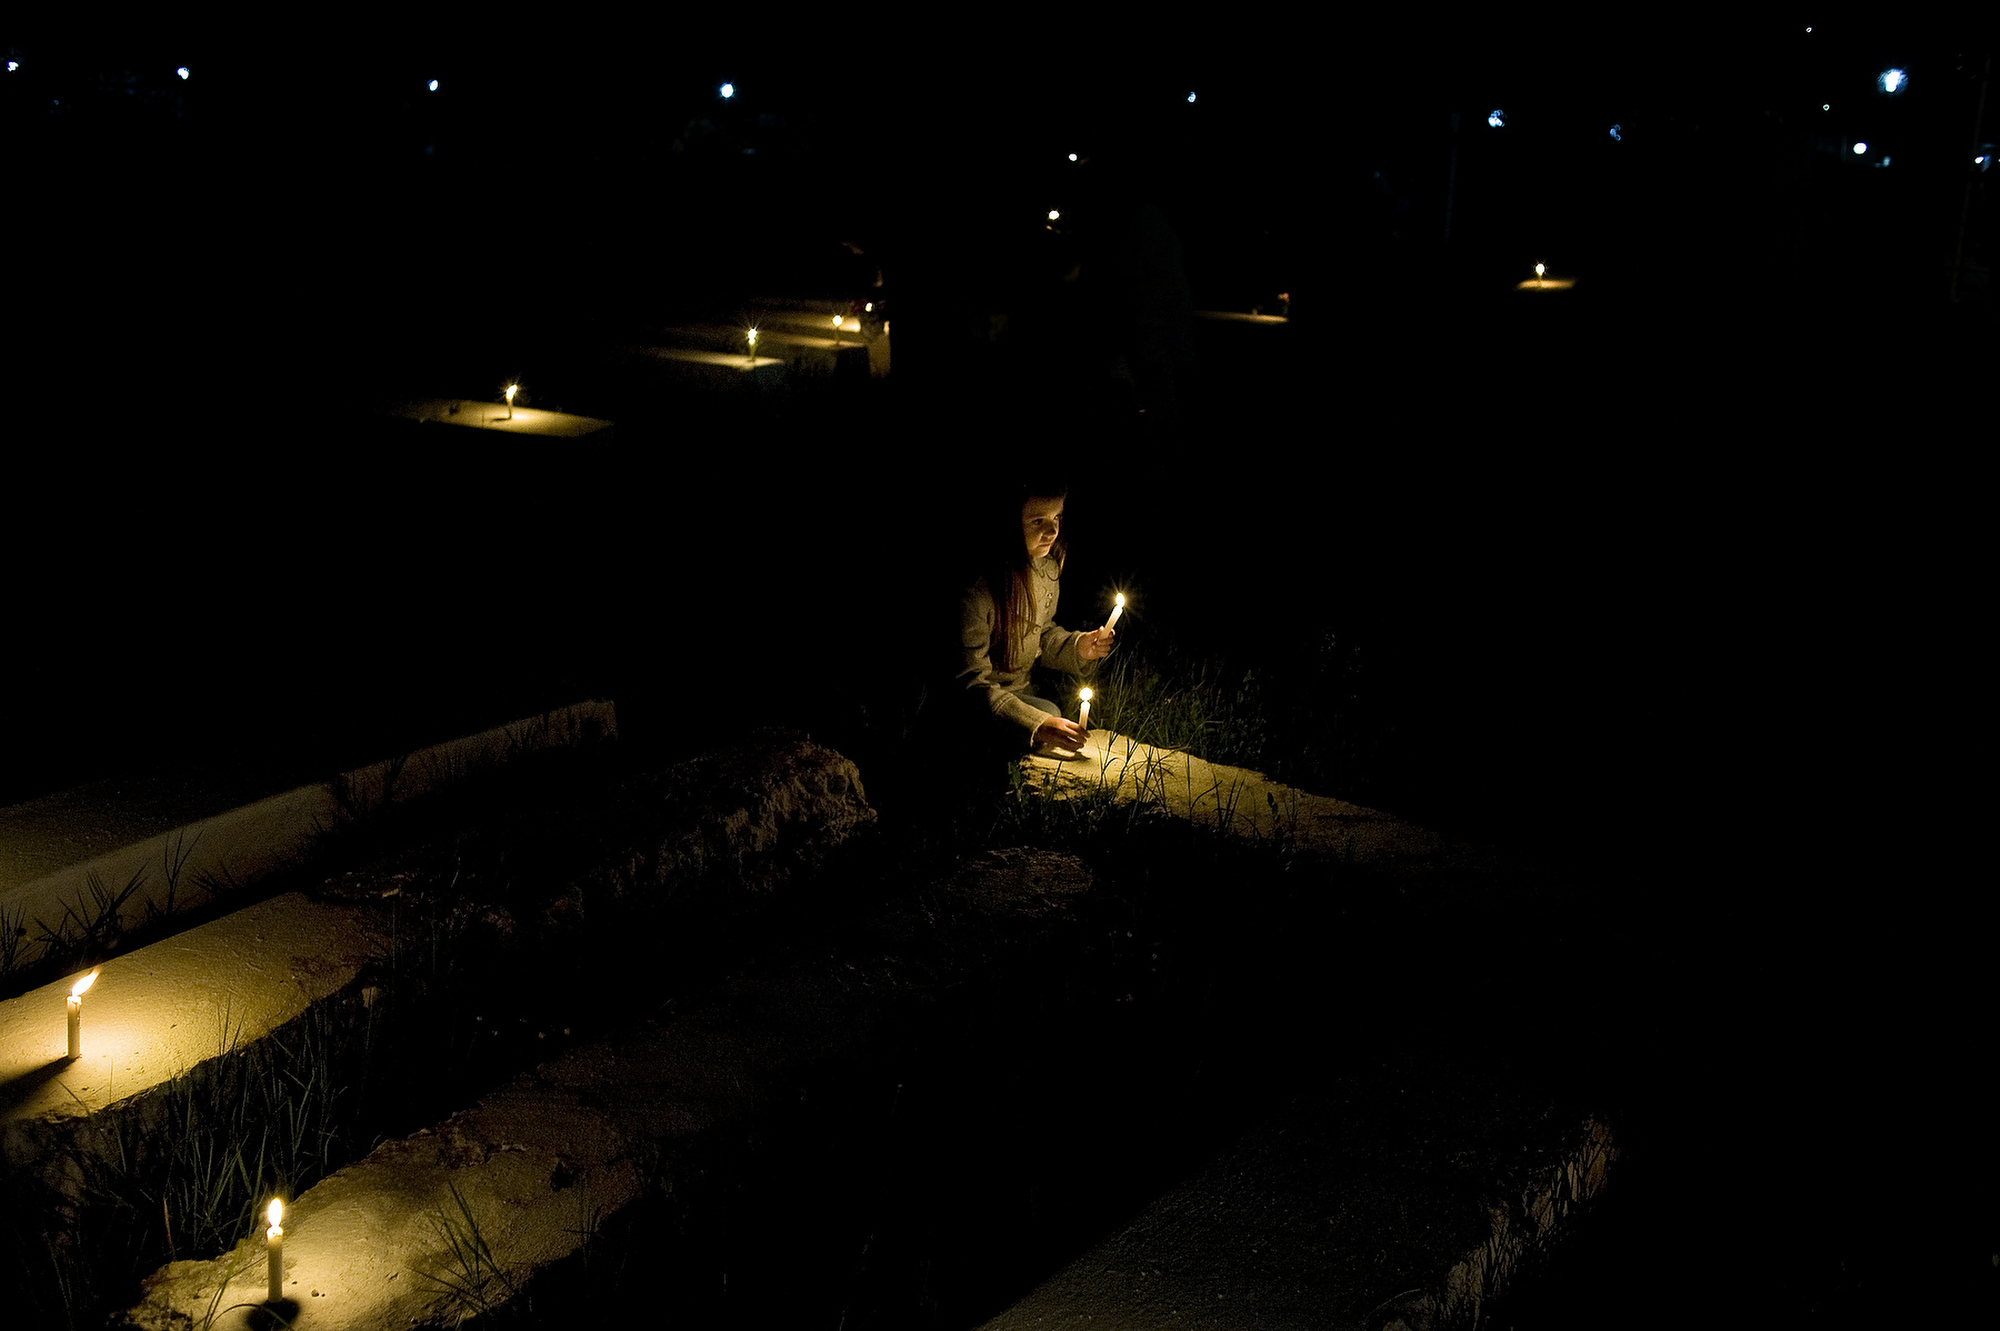 A young girl places candles on gravestones at the Jewish Cemetery of Ouazanne during the hilloula or pilgrimage of Rabbi Amran Ben Diwan. (Photo: Aaron Vincent Elkaim)